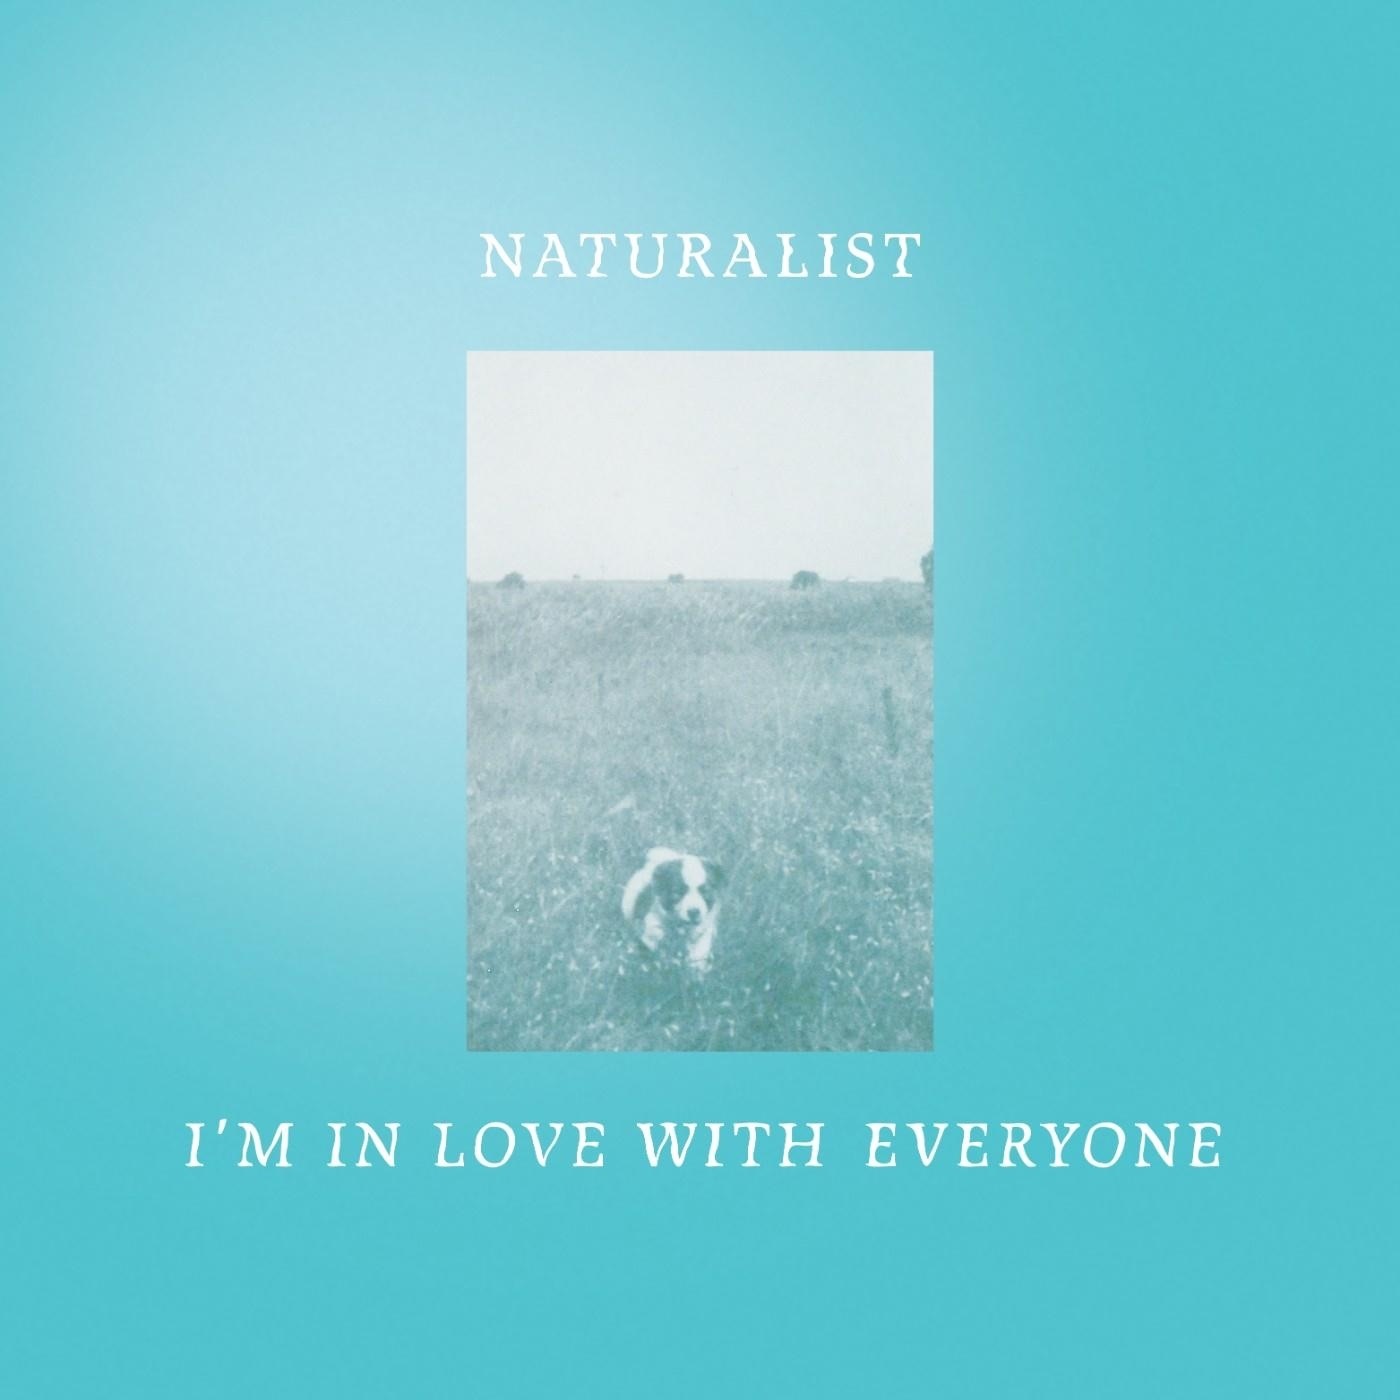 I'm in Love with Everyone by Naturalist